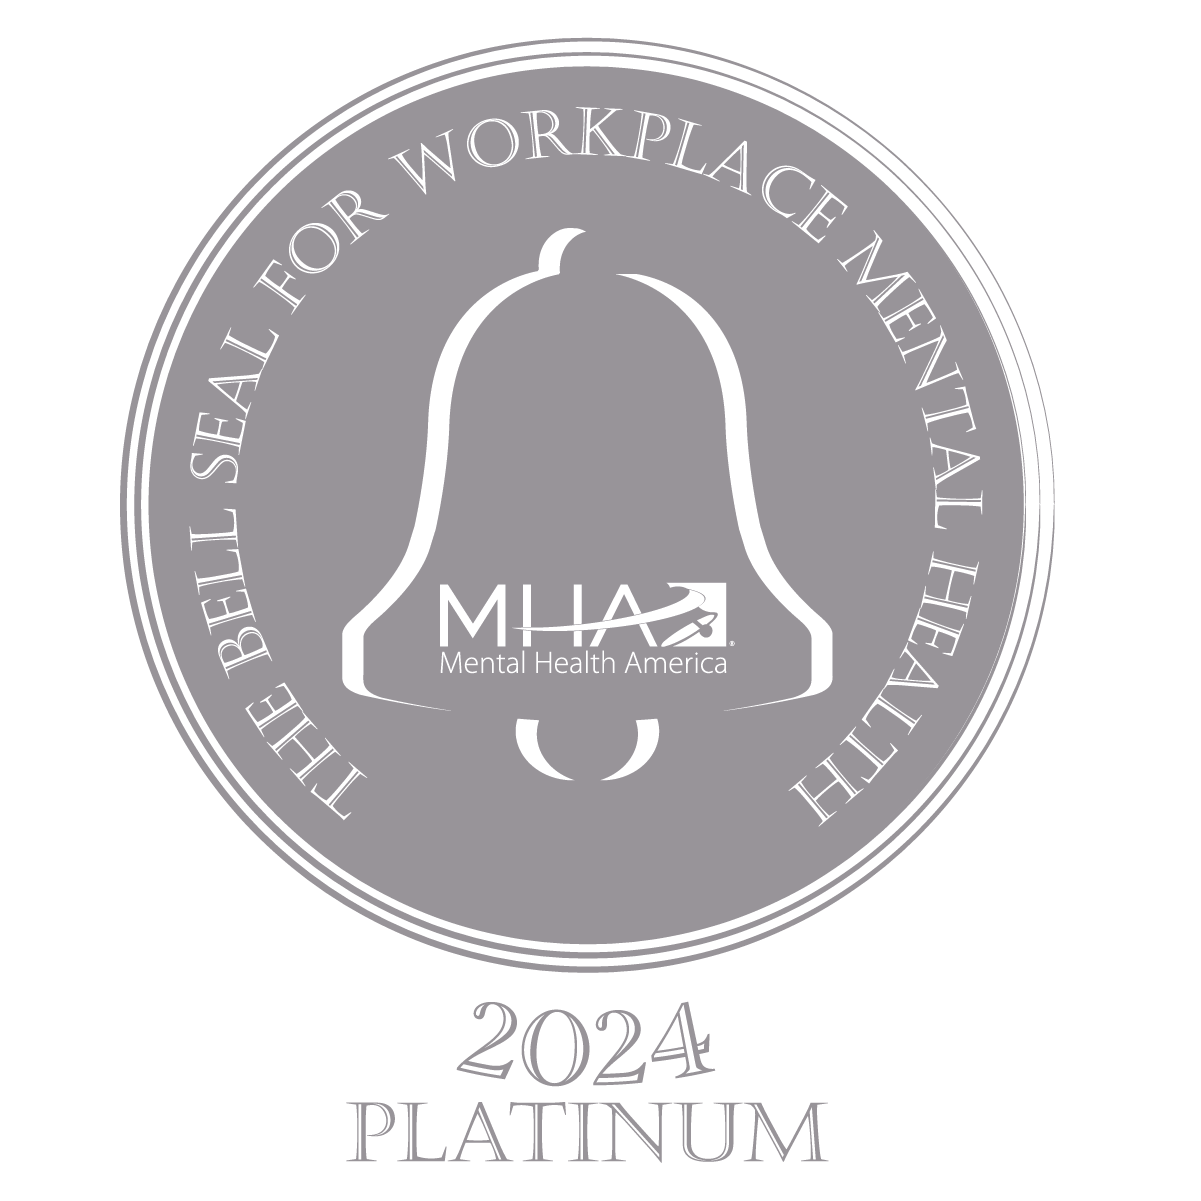 The Bell Seal for Workplace Mental Health - 2024 Platinum